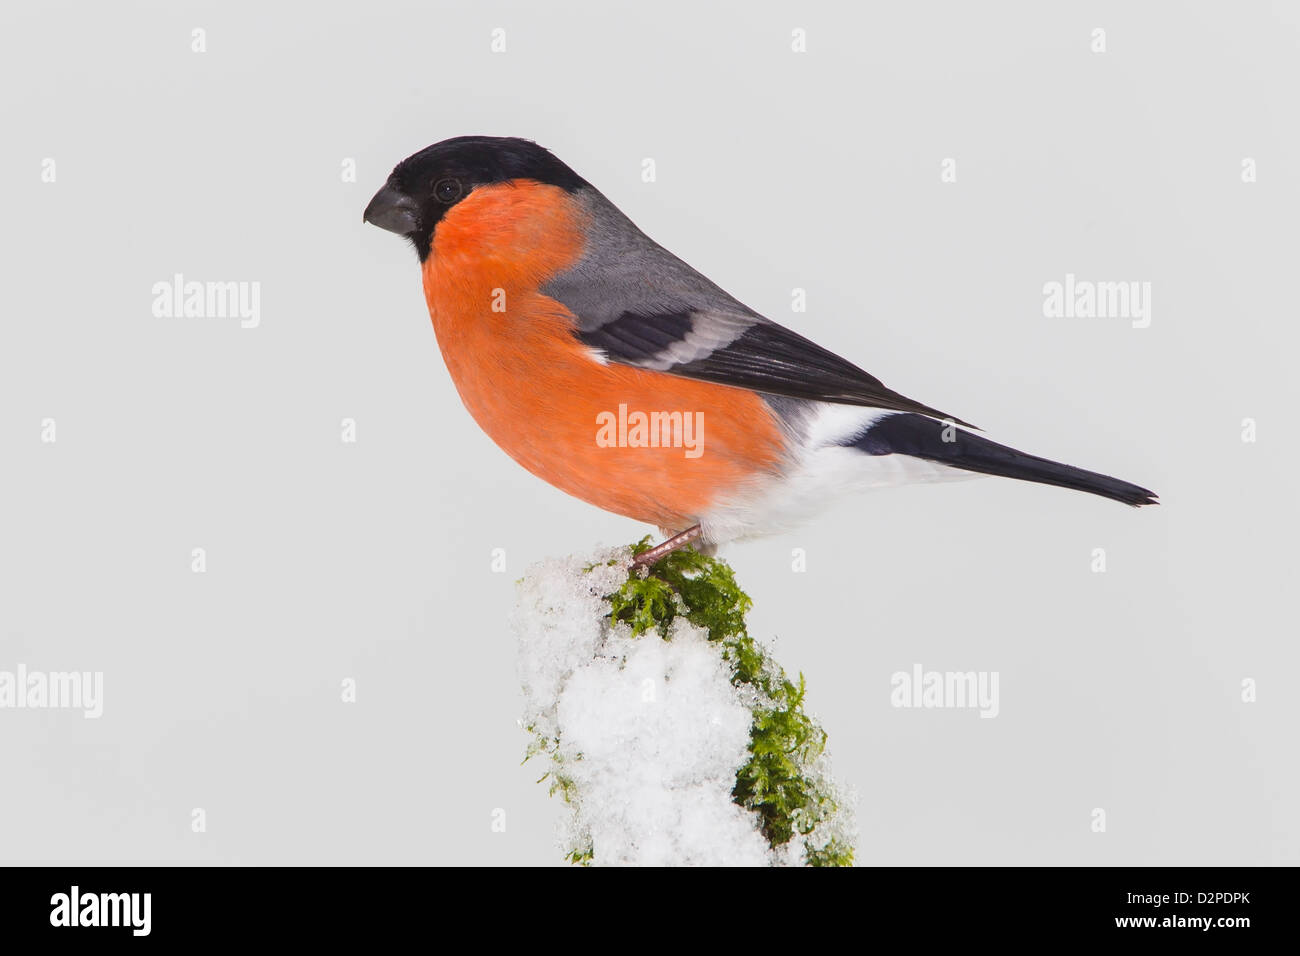 BULLFINCH ON A SNOW COVERED BRANCH Stock Photo